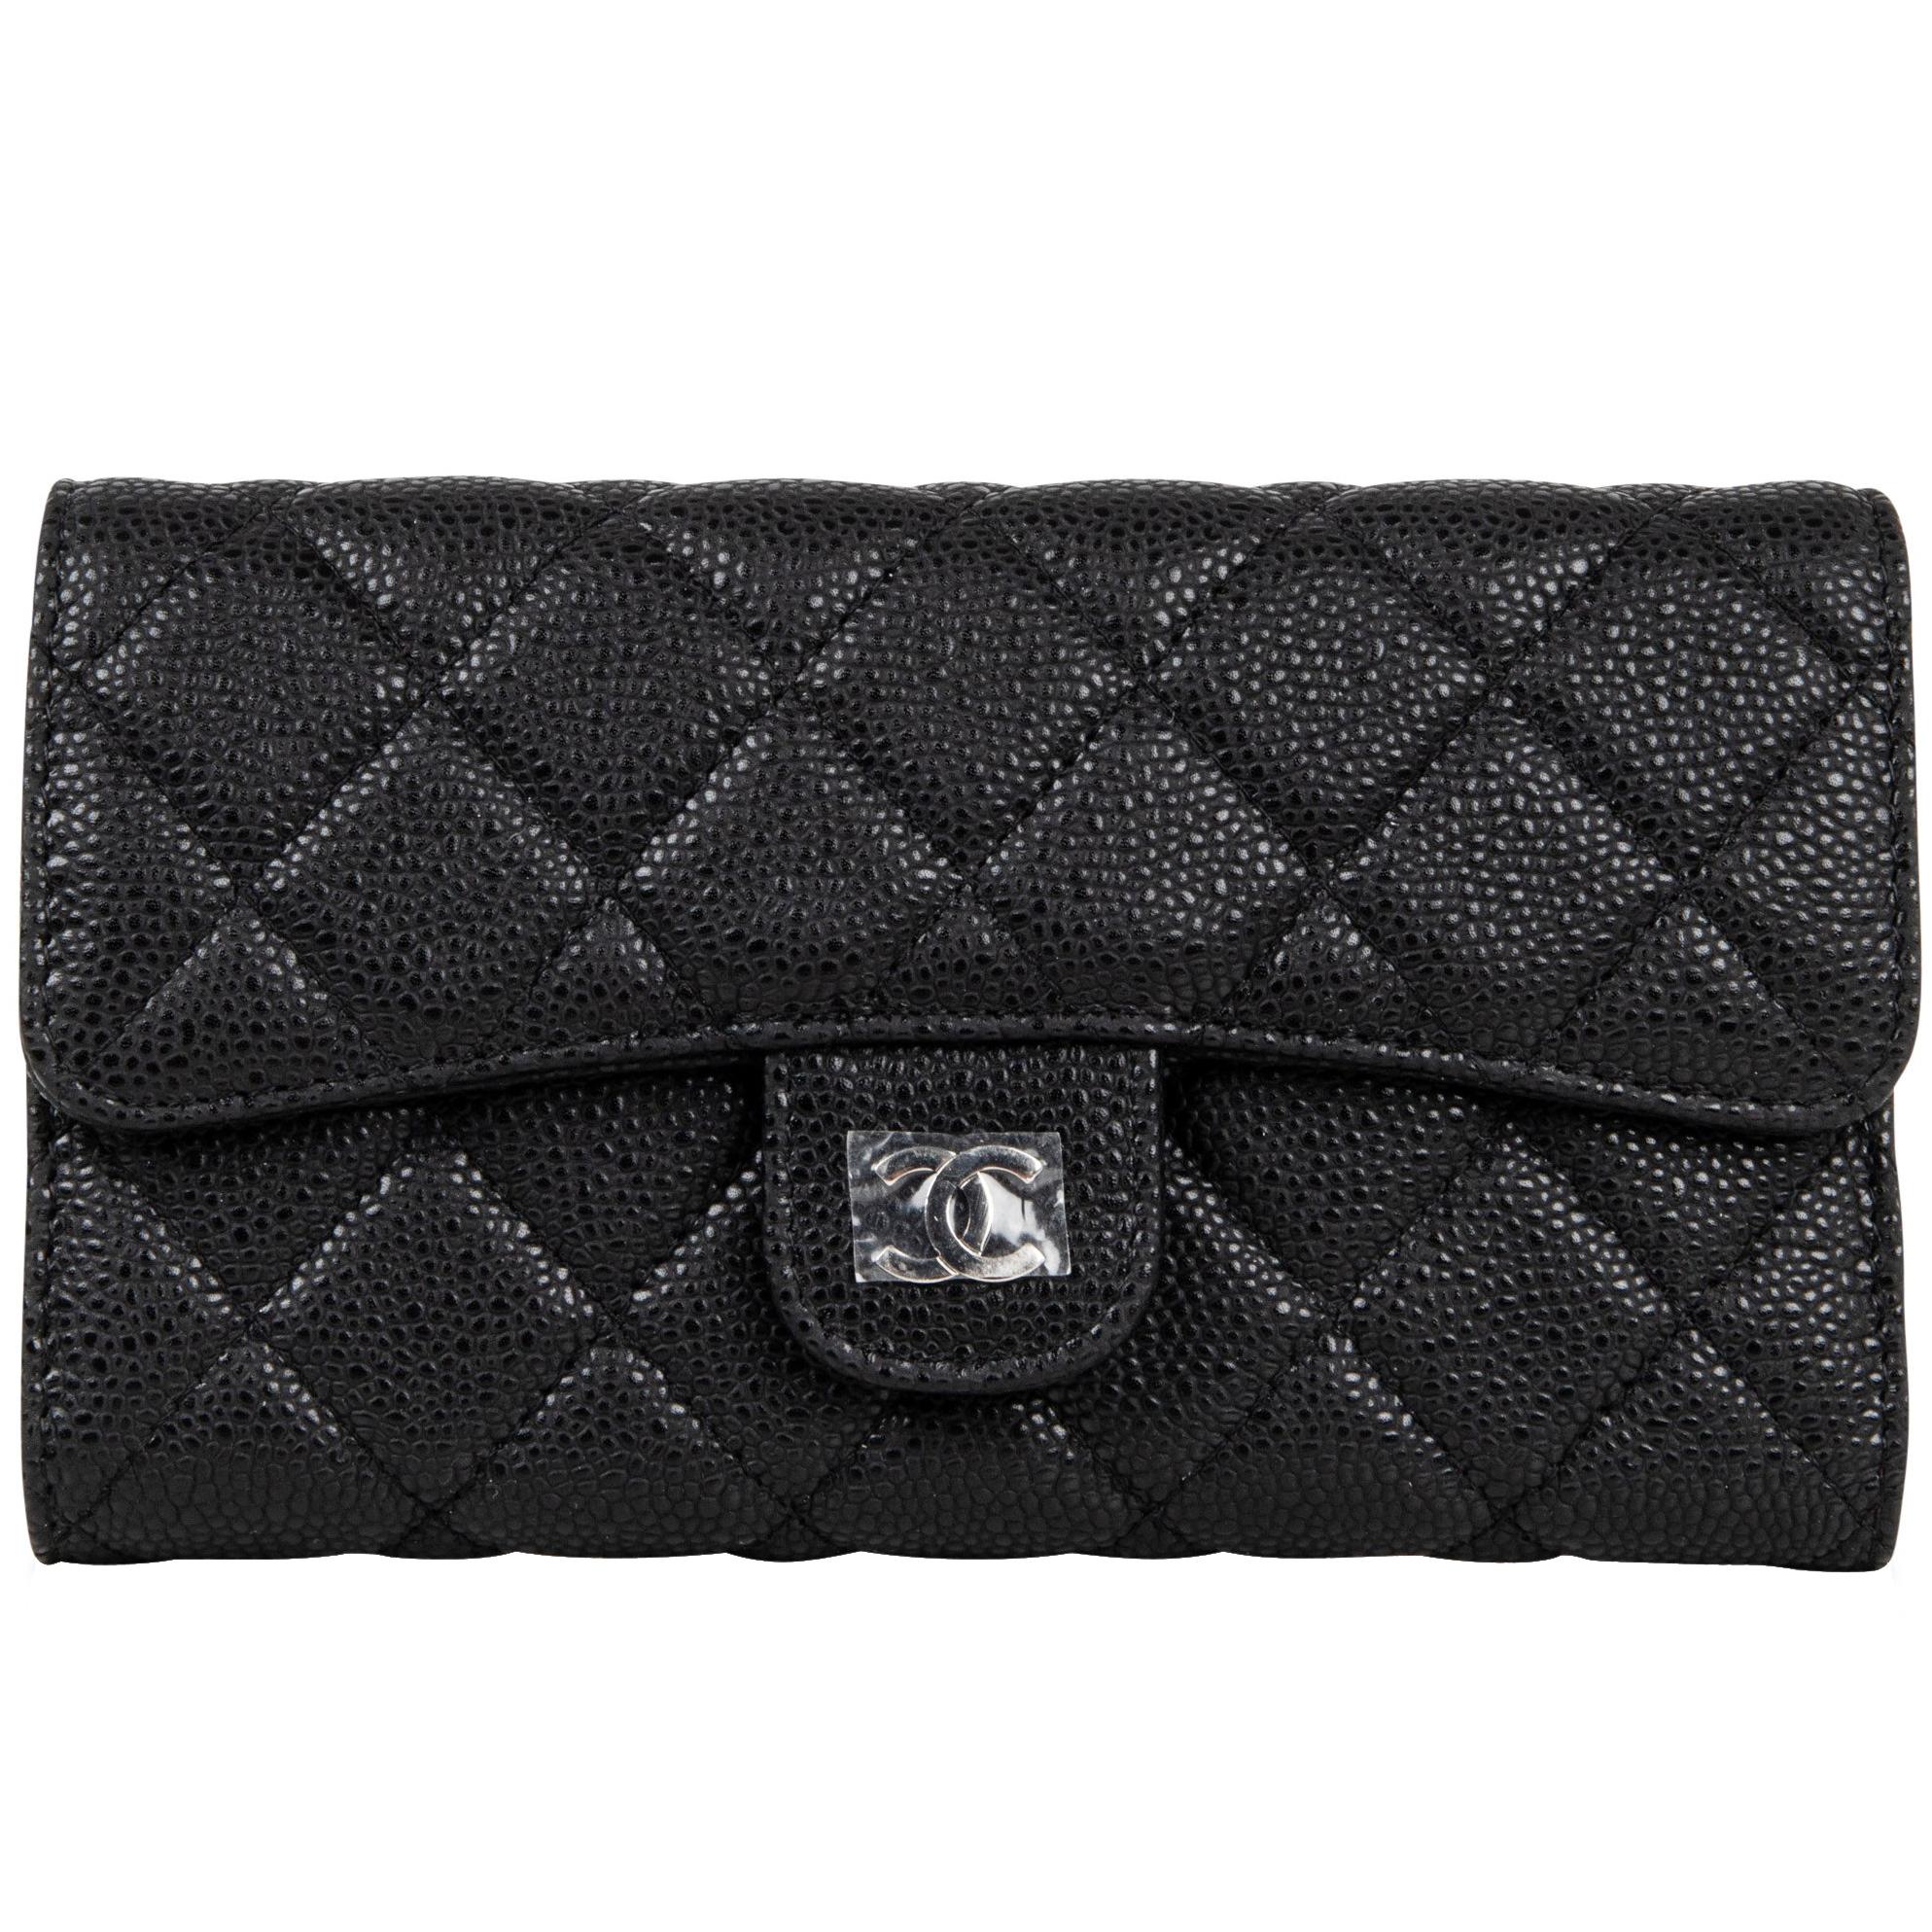 Chanel Wallet Classic Long Black Caviar Leather New